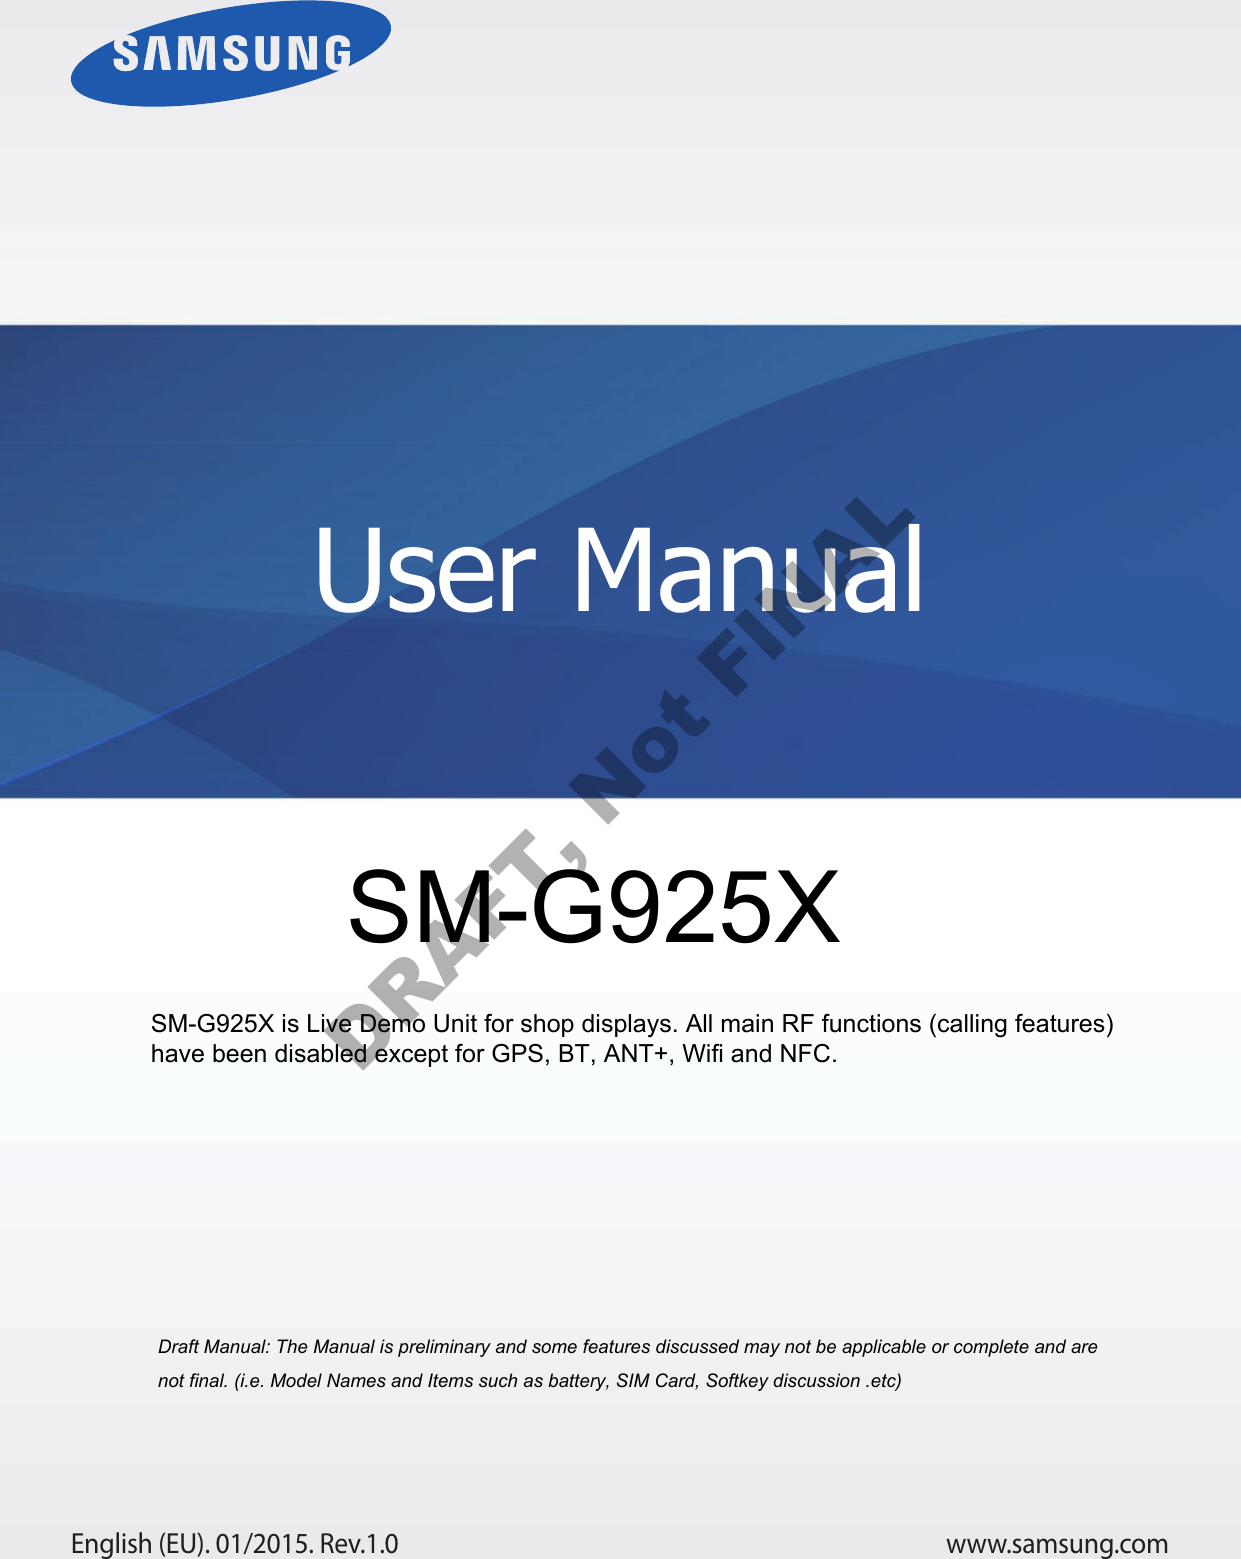 www.samsung.comUser ManualEnglish (EU). 01/2015. Rev.1.0a ana  ana  na and  a dd a n  aa   and a n na  d a and   a a  ad  dn SM-G925X SM-G925X is Live Demo Unit for shop displays. All main RF functions (calling features) have been disabled except for GPS, BT, ANT+, Wifi and NFC.DRAFT, Not FINAL